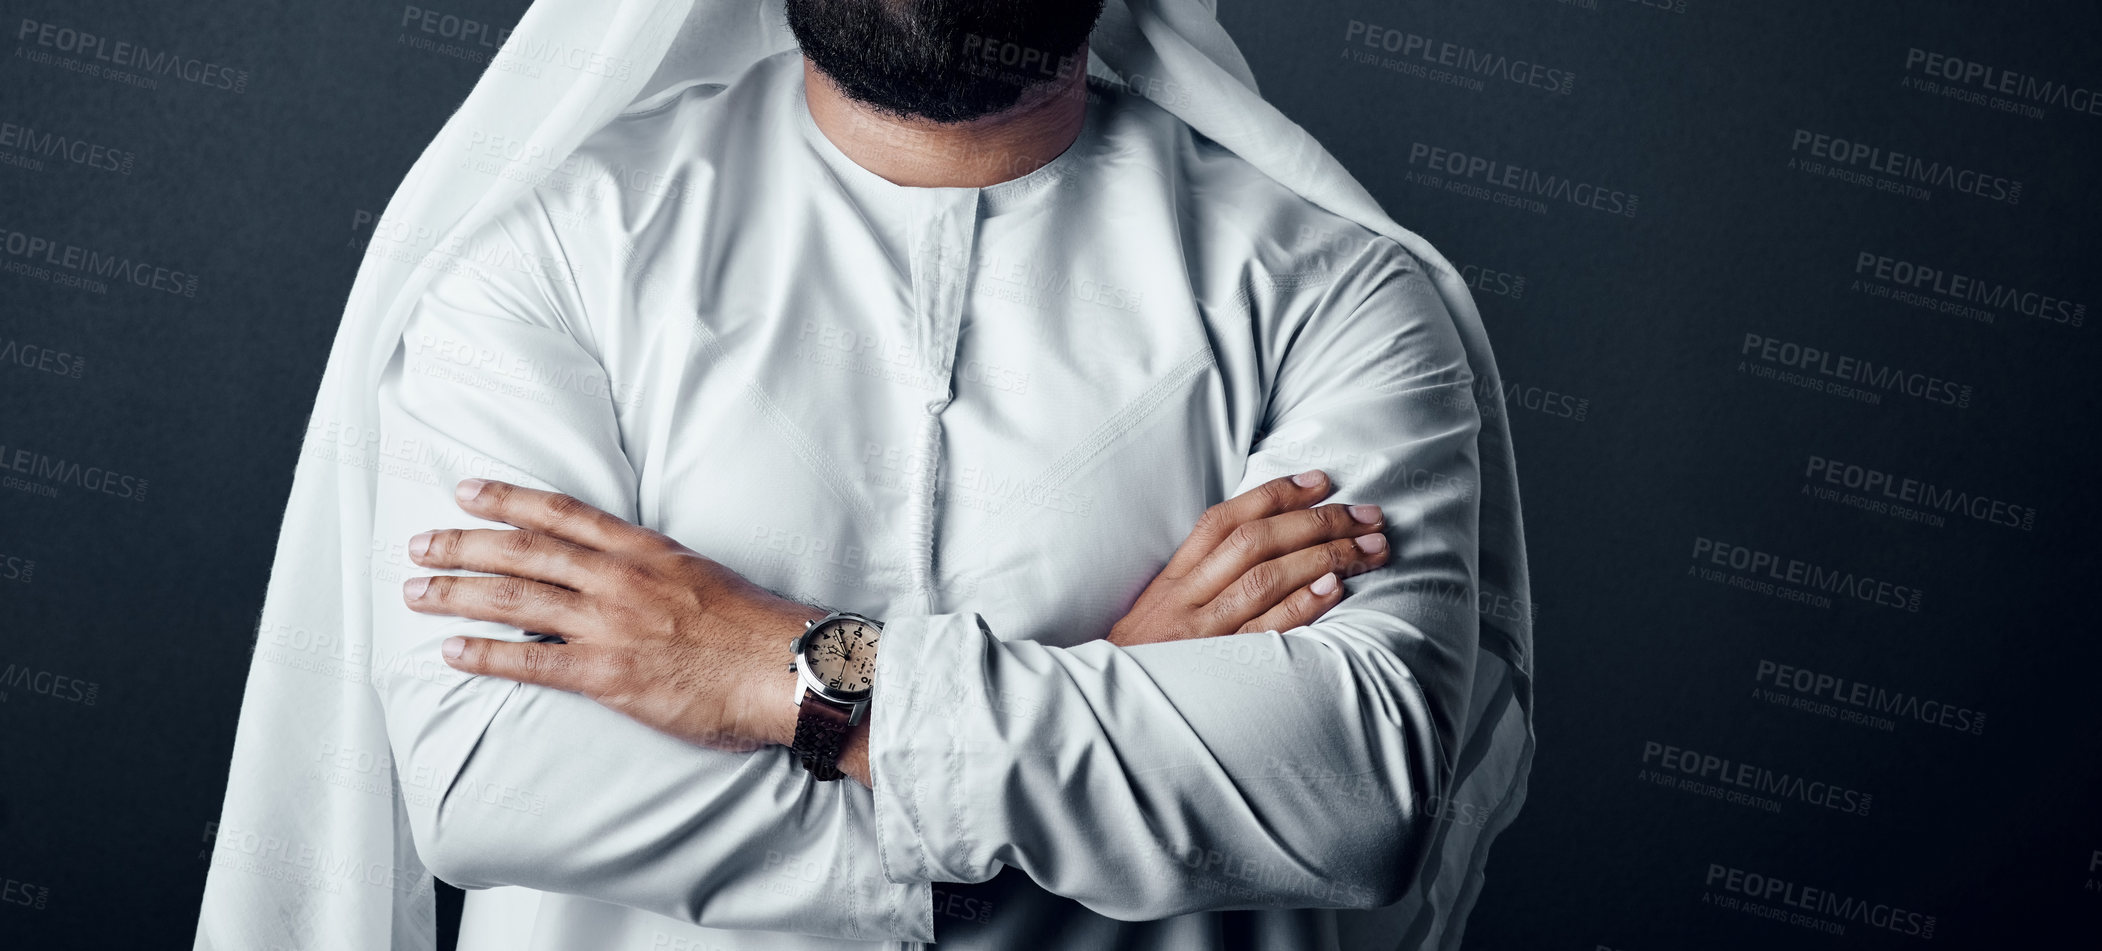 Buy stock photo Studio shot of an unrecognizable man dressed in Islamic traditional clothing posing against a dark background